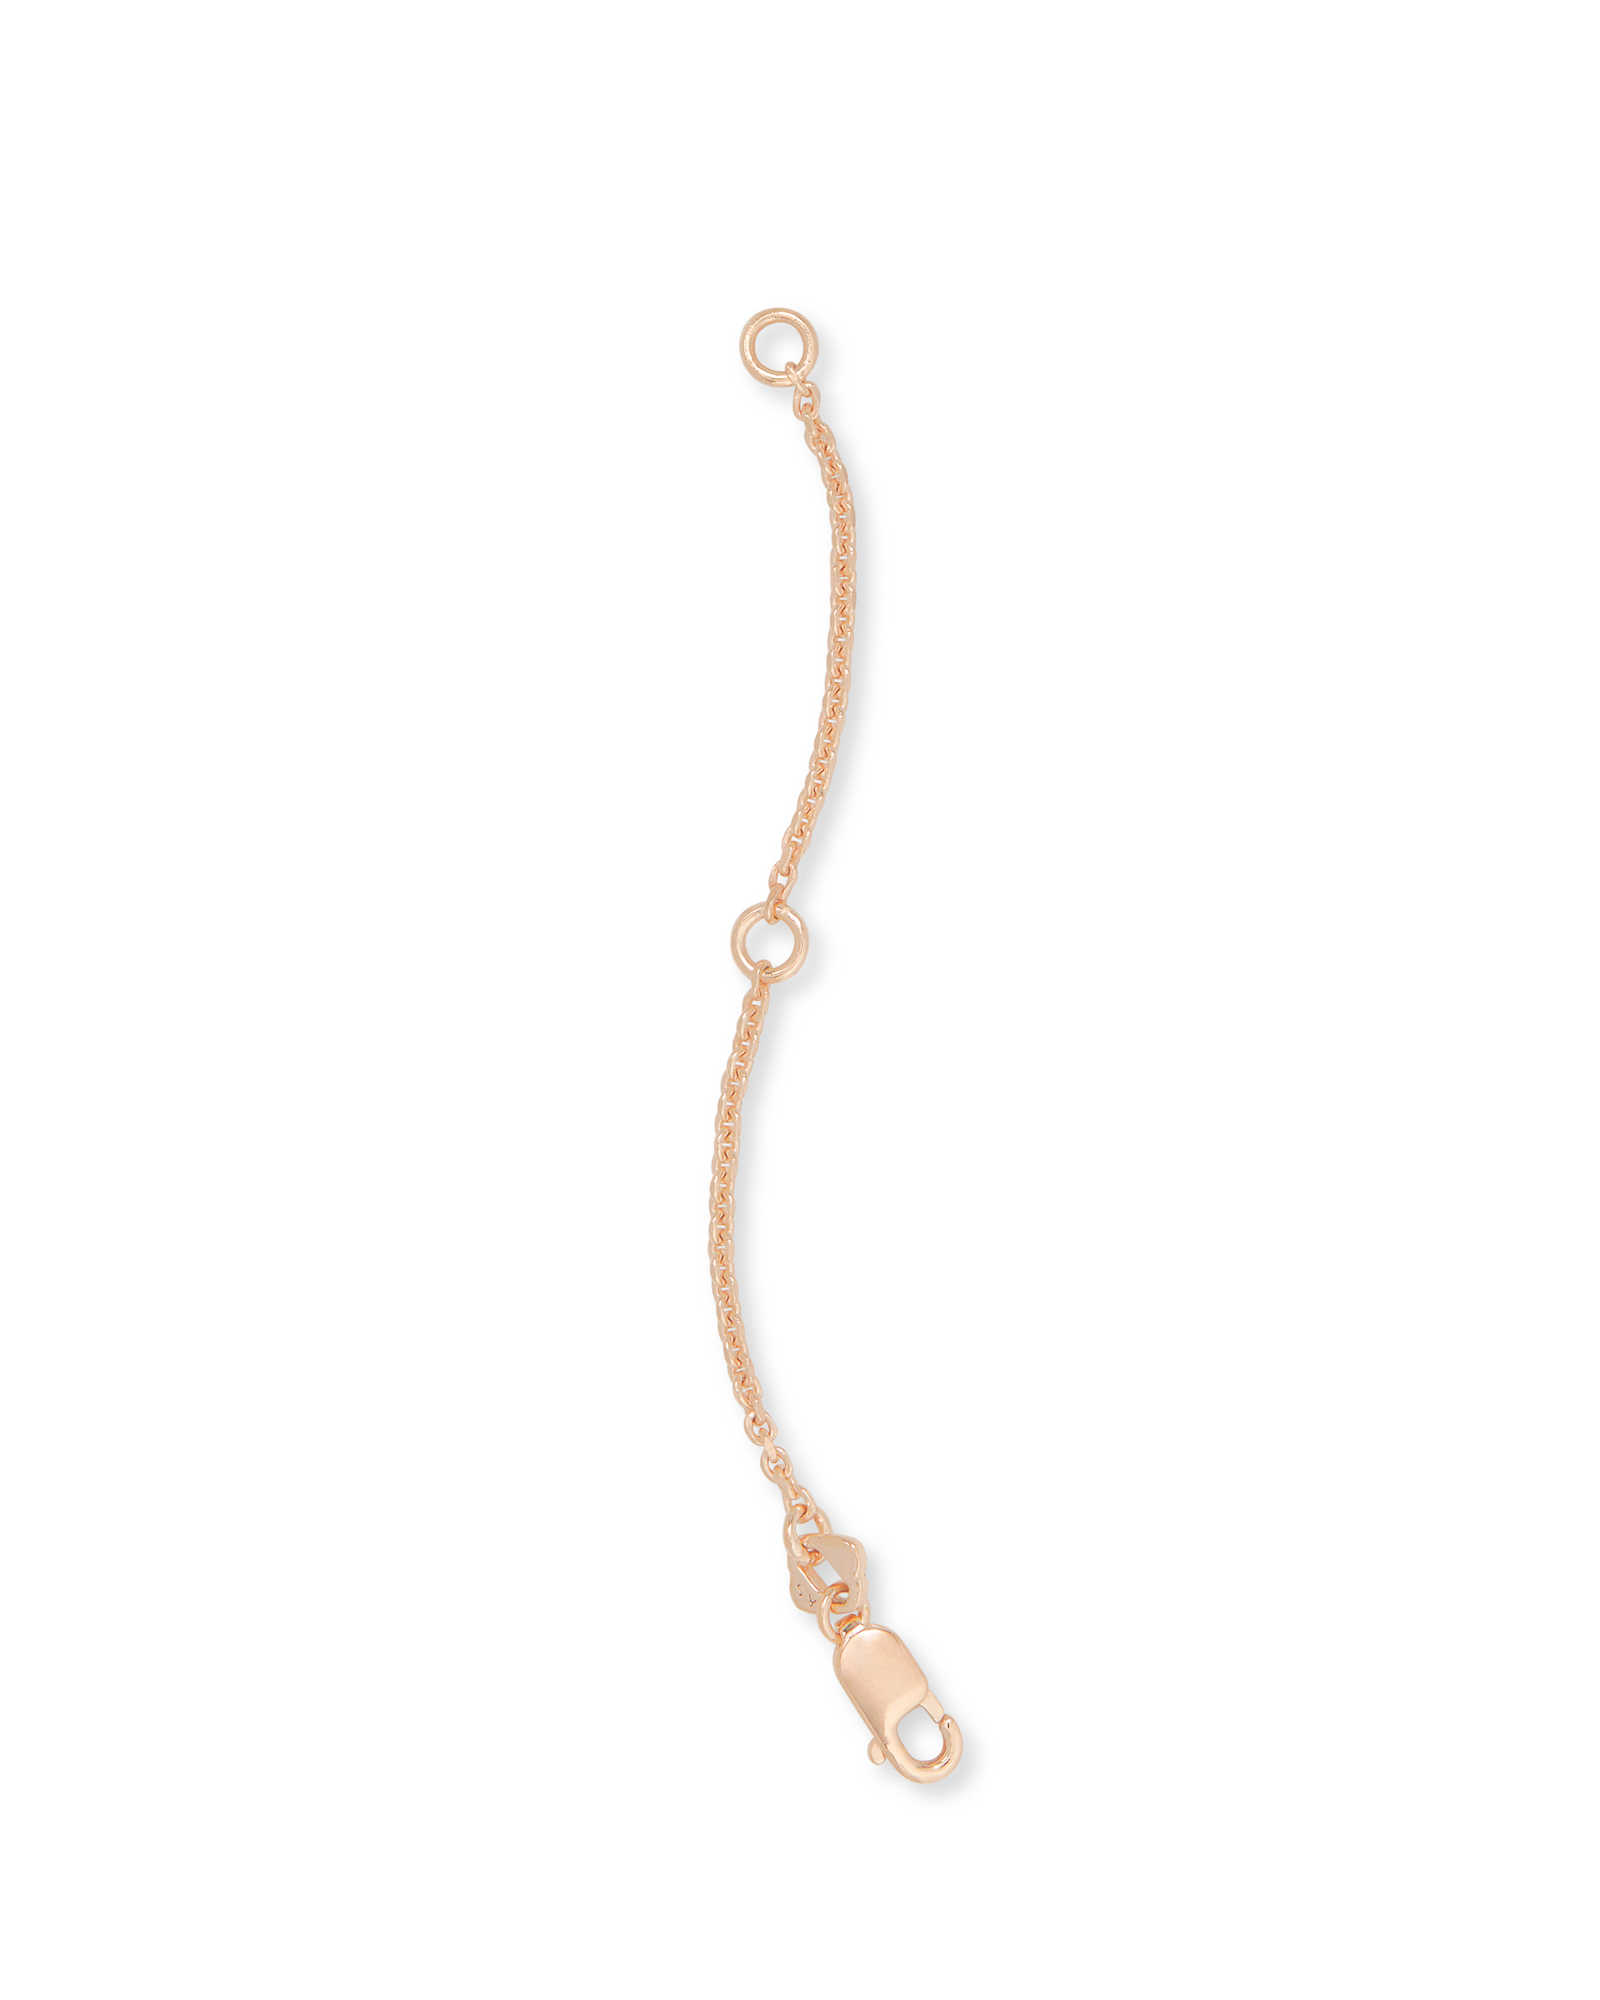 Rose Gold Chain Extender, 14k Rose Gold Filled, Removable Chain Extension,  Necklace Extension, Bracelet Extender, Add Length to Necklace 